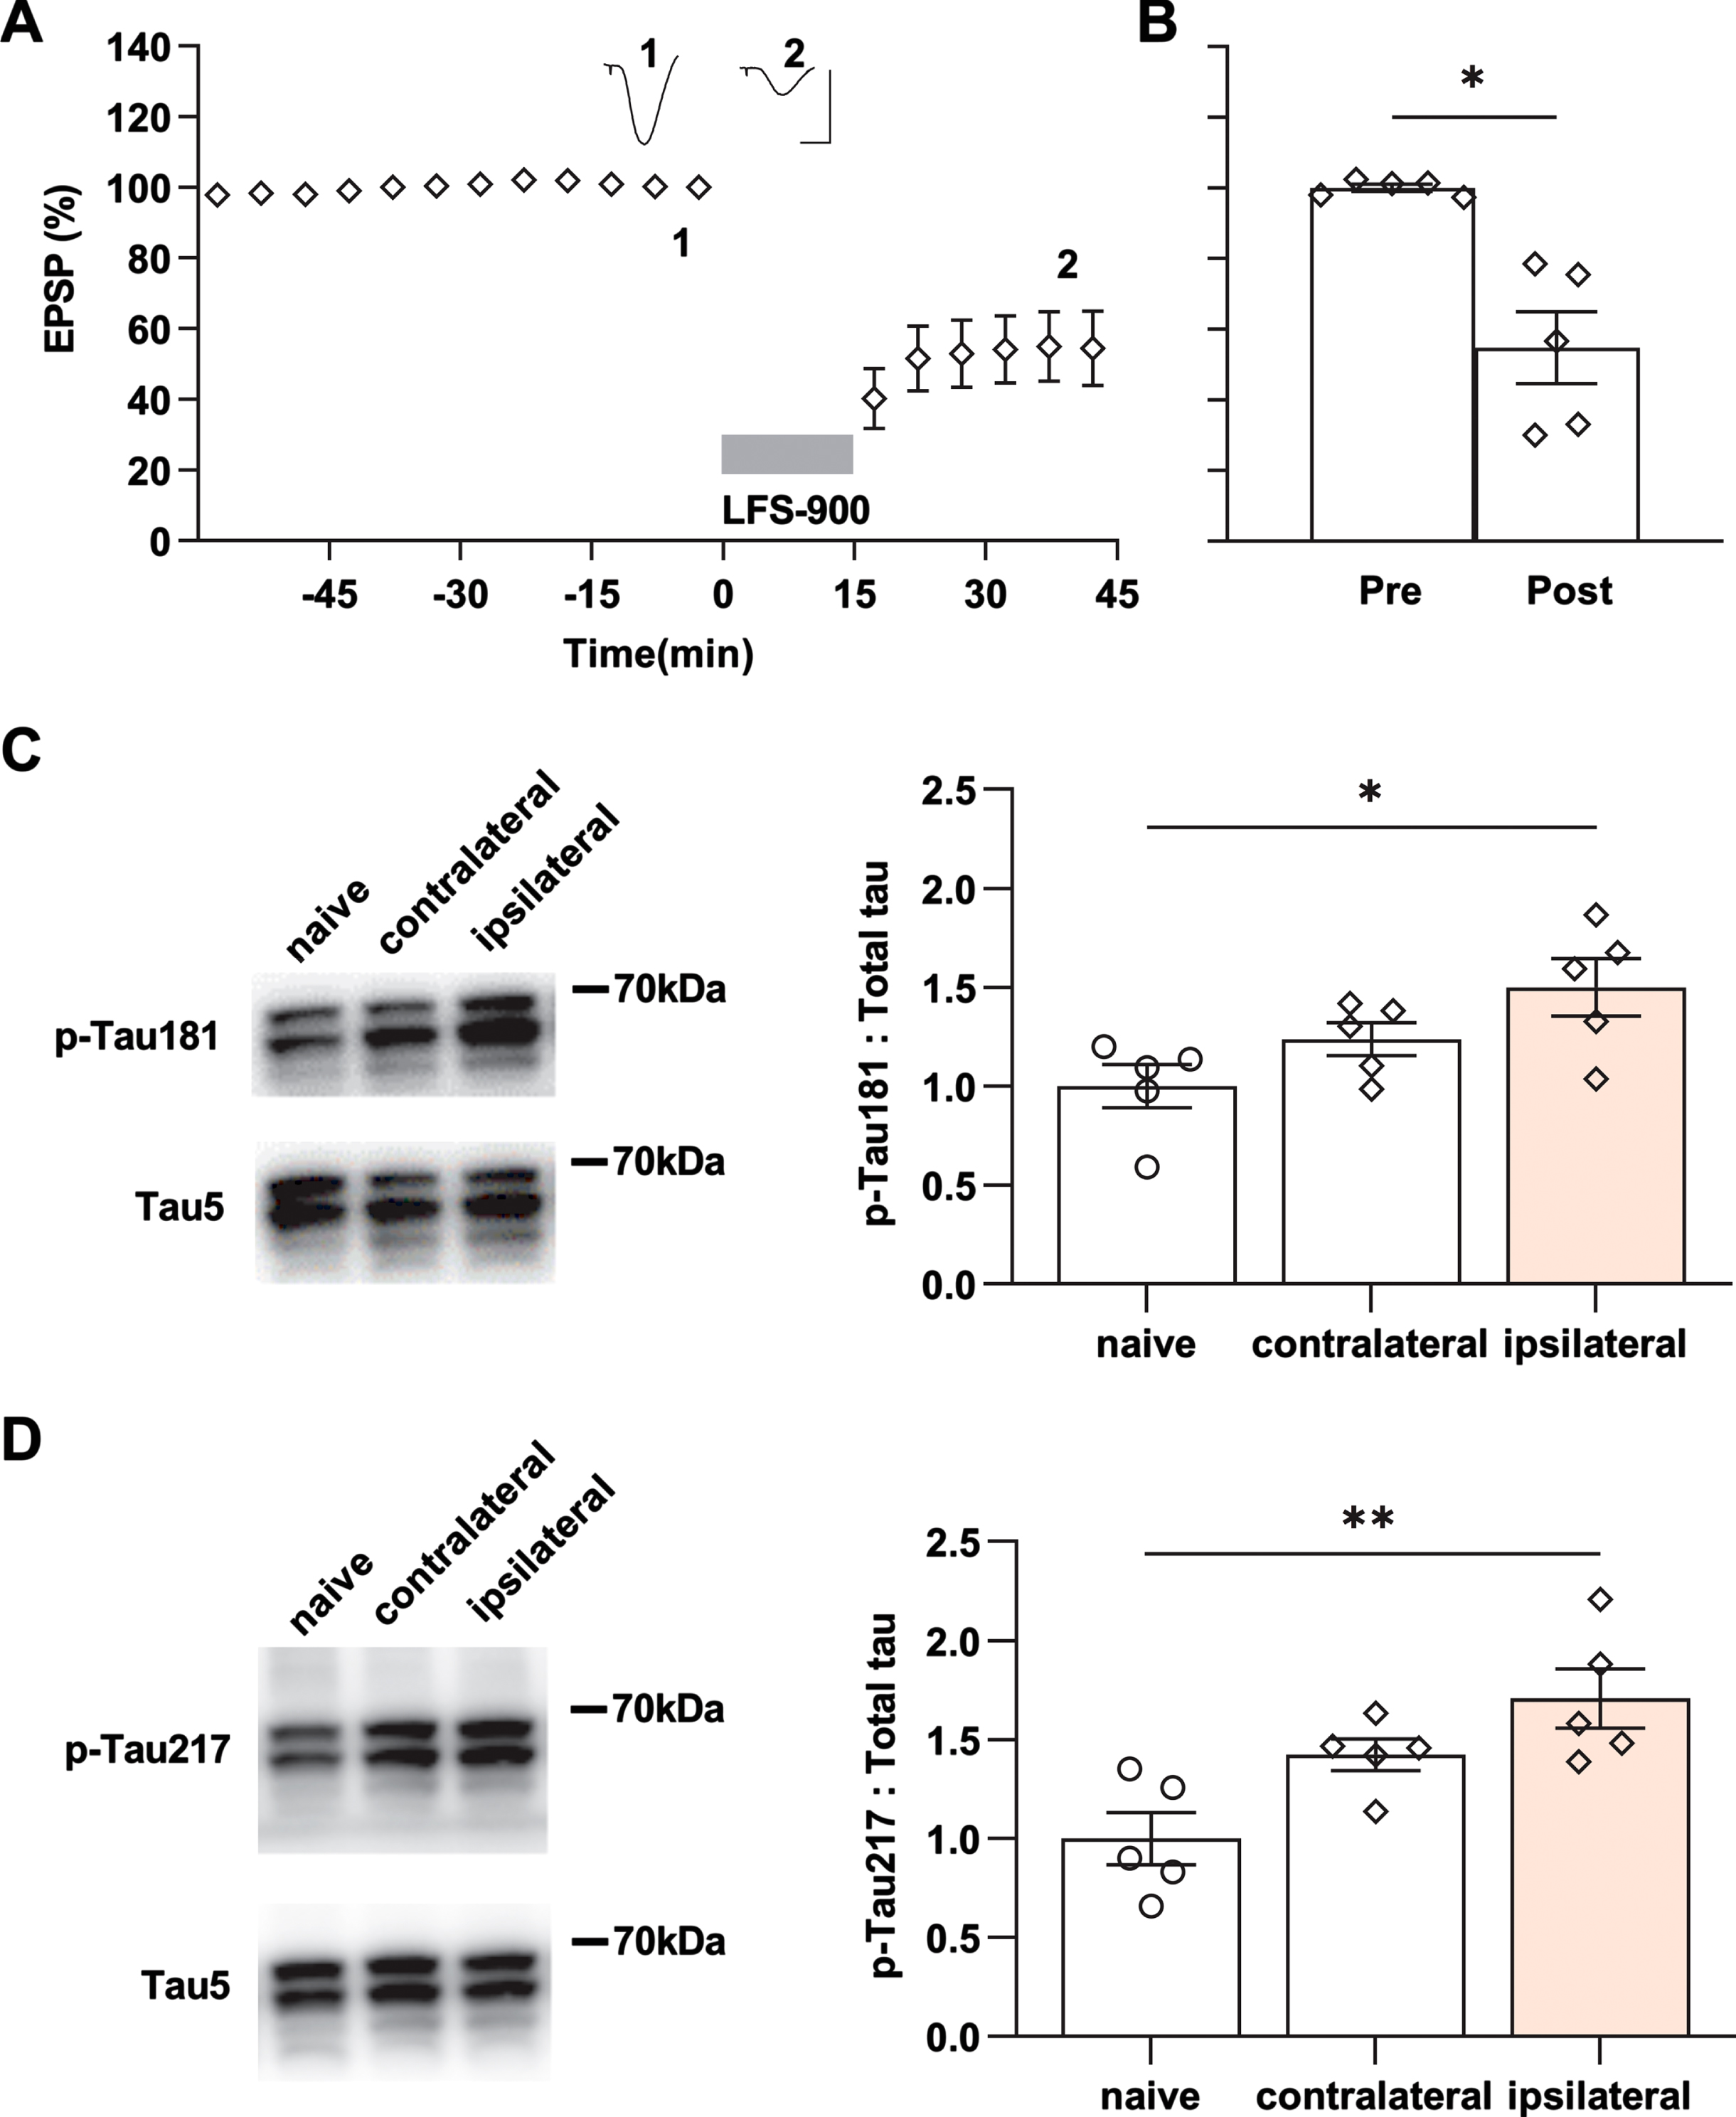 LFS enhances p-Tau181 and p-Tau217 in aged rats. A) Application of LFS-900 induced robust LTD at CA3-CA1 synapses in anaesthetized 17-18-month-old rats. Calibration bars: vertical, 2 mV; horizontal, 10 ms. B) Summarized EPSP amplitude 30 min post LFS. The EPSP decreased to 54.8±10.2% (n = 5, p = 0.0110 compared with Pre, paired t). C) Left panels show representative blotting band of p-Tau181 and total tau (Tau5) in the hippocampus of age-matched naïve control group and the experimental group either contralateral or ipsilateral to LFS. Statistical results of p-Tau181 over total tau was quantified and normalized to naïve control (n = 5 per group, ipsilateral versus naïve, p = 0.0292; contralateral versus naïve, p = 0.5075; contralateral versus ipsilateral, p = 0.4022; one-way ANOVA-Bonferroni). D) Left panels show representative blotting band of p-Tau217 and total tau (tau5) in age-matched naïve control group, contralateral hippocampus, and ipsilaterally stimulated hippocampus. Statistical results of p-Tau217 over total tau was quantified and normalized to naïve control (n = 5 per group, ipsilateral versus naïve, p = 0.0049; contralateral versus naïve, p = 0.0979; contralateral versus ipsilateral, p = 0.3905; one-way ANOVA-Bonferroni). Values are mean±s.e.m.